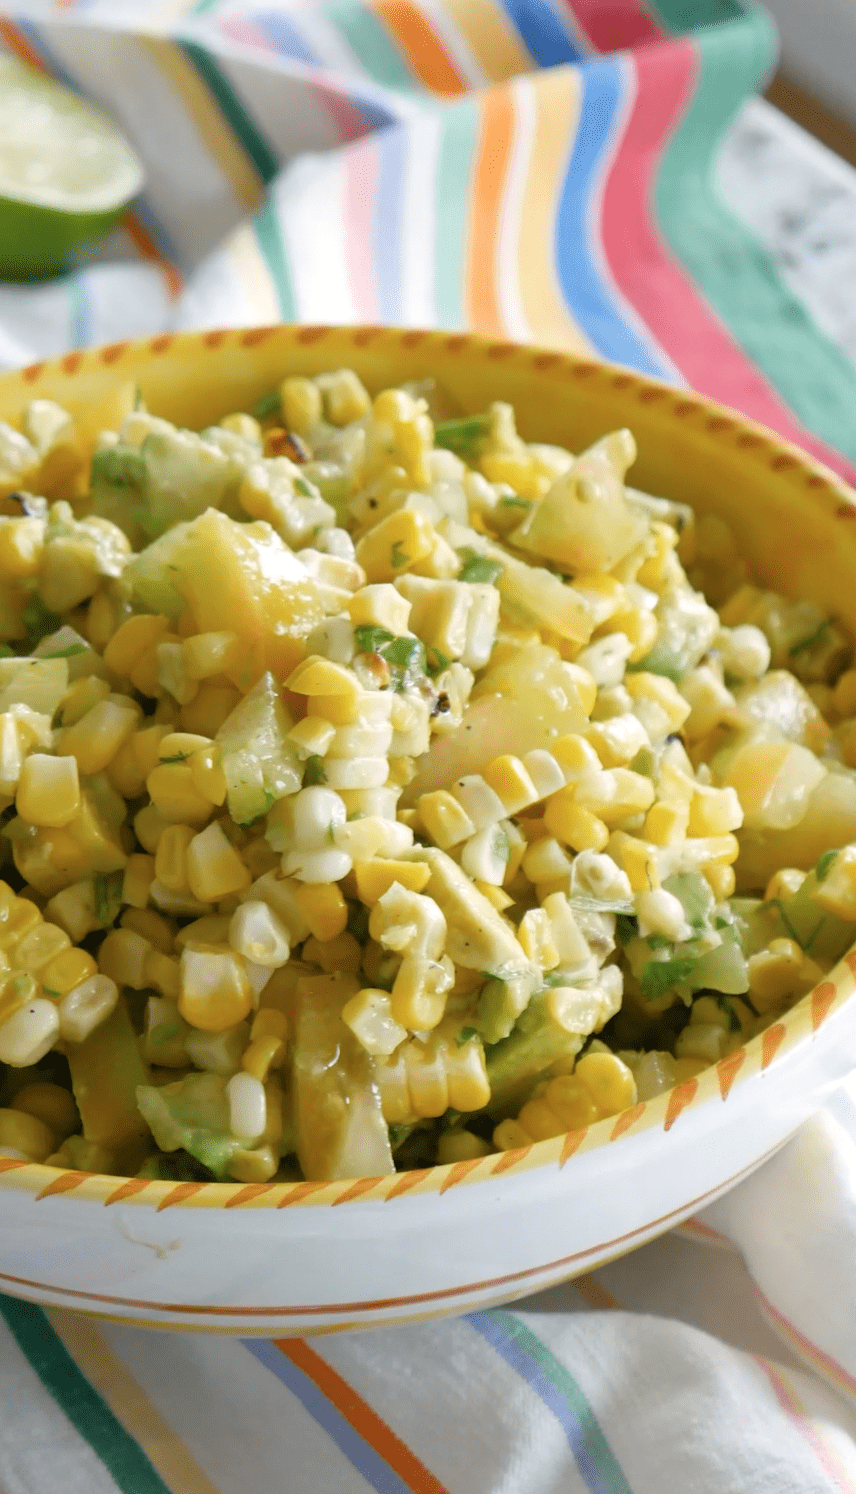 Even if You’re Not a Foodie, You Will Love This Easy Grilled Corn Salad